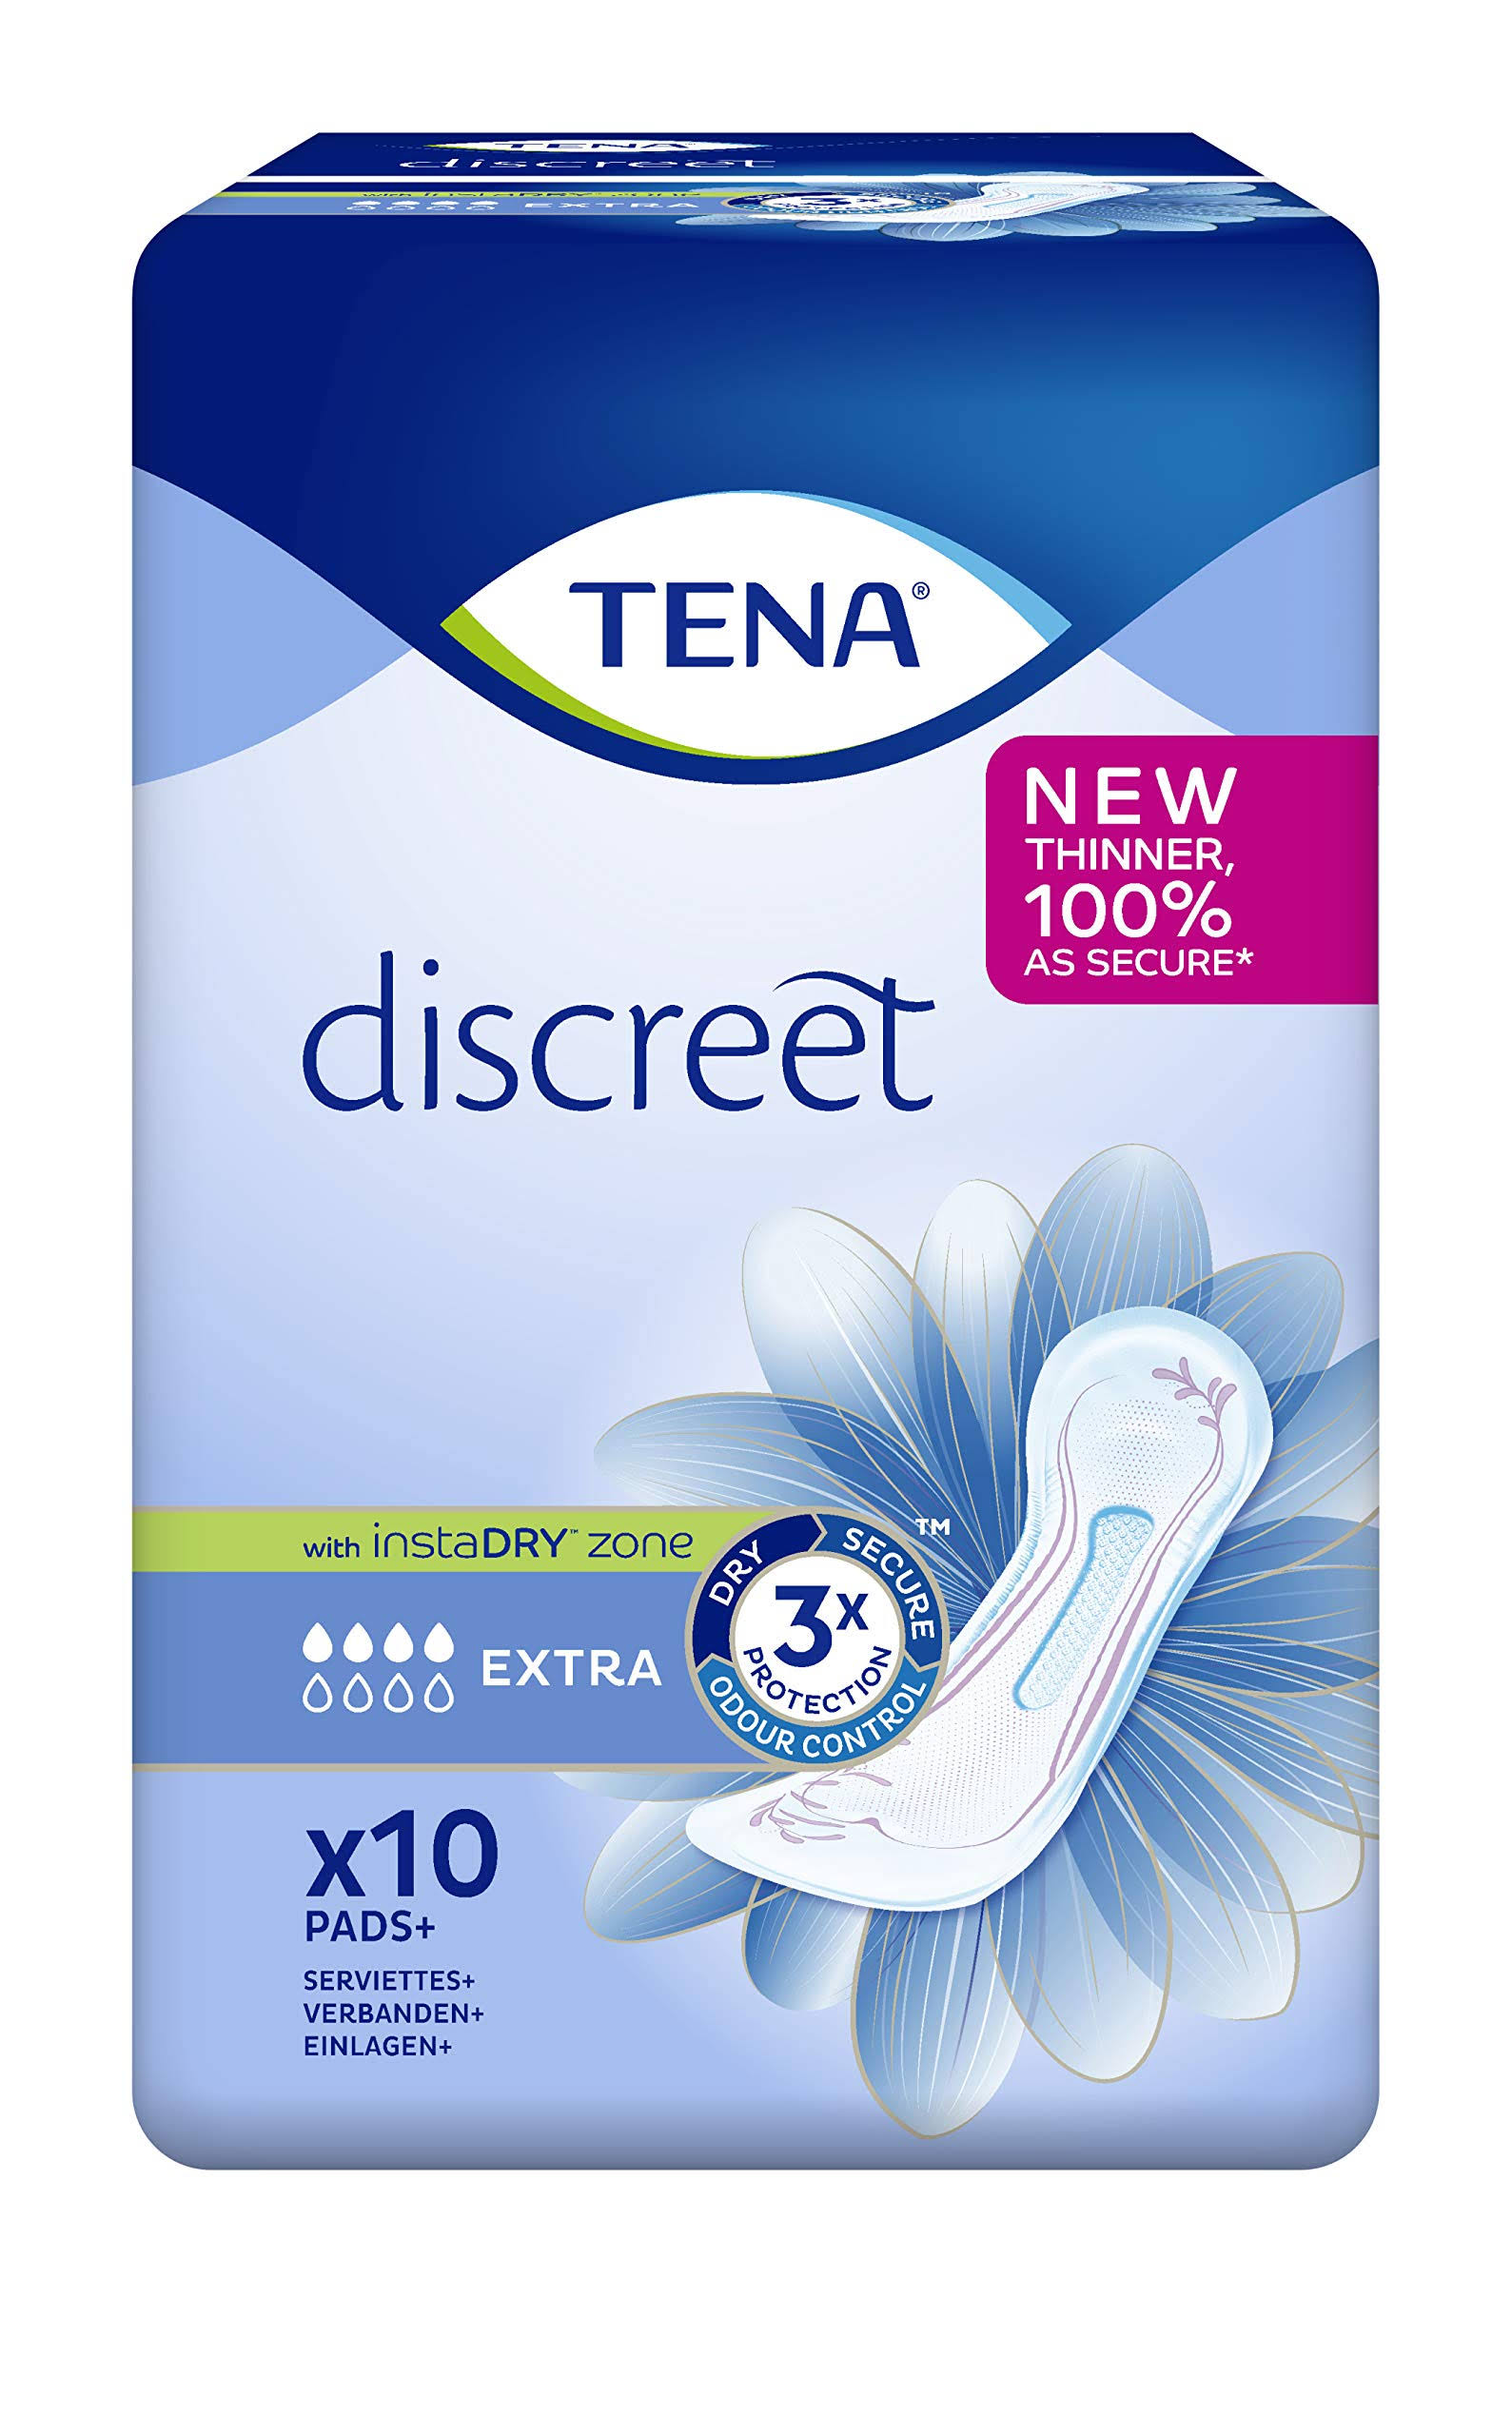 Tena Lady Discreet Extra Incontinence Pads 10 per Pack